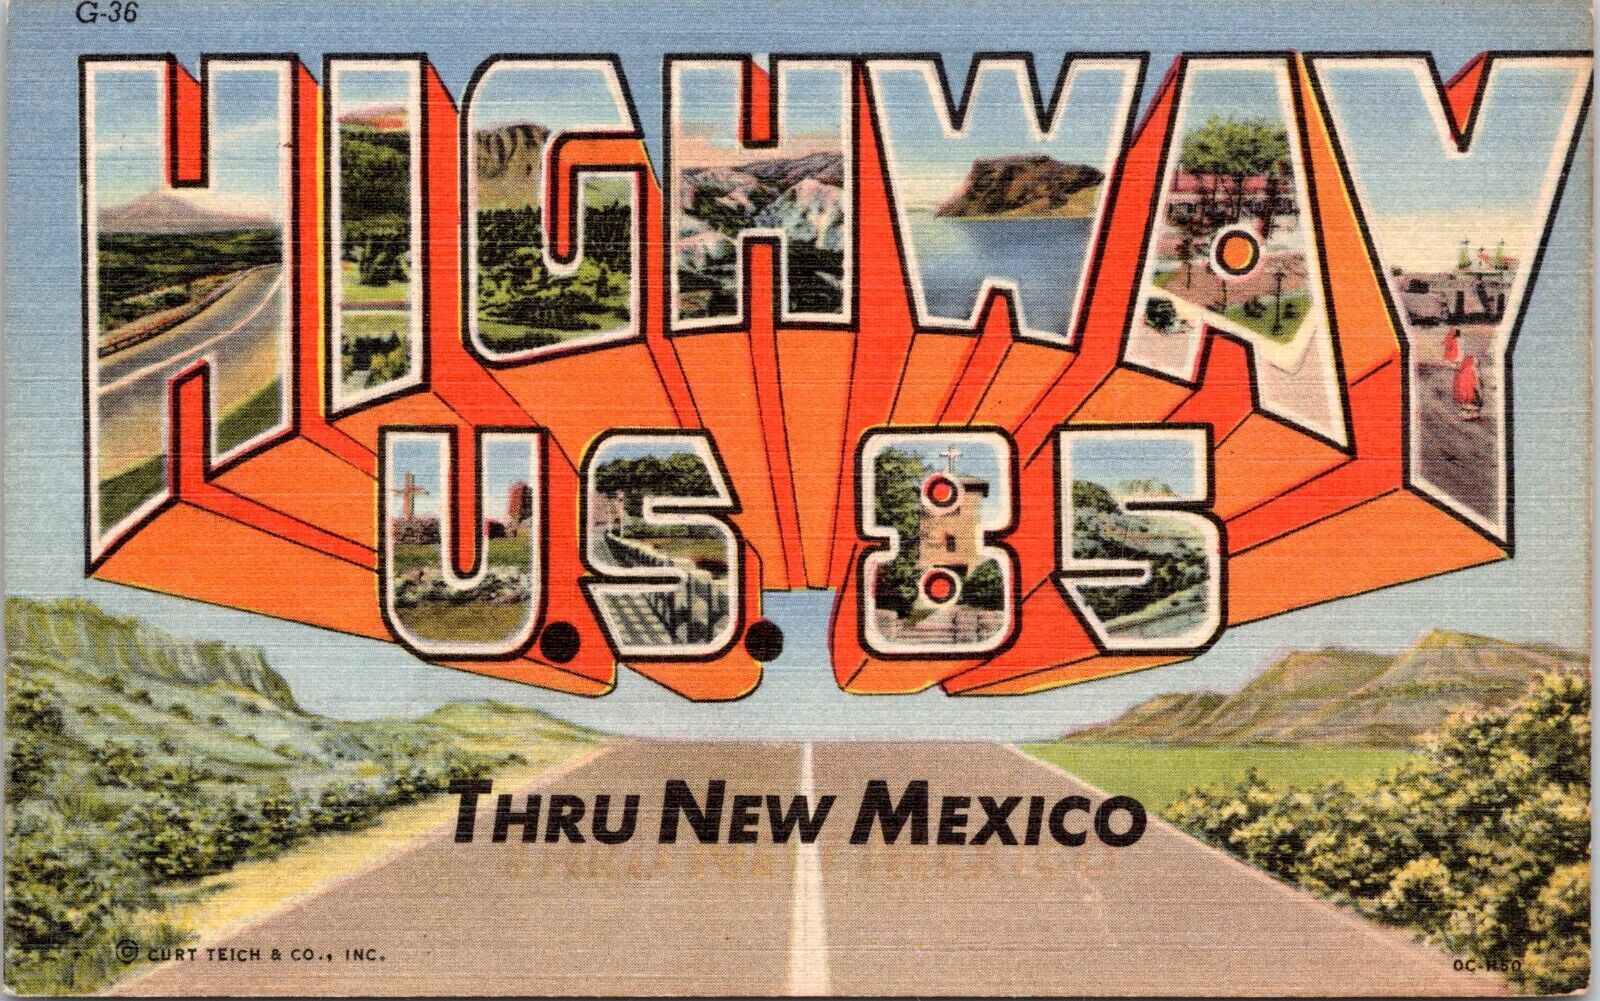 Large Letter Greetings Highway US 85 Thru New Mexico- 1940 Linen Postcard- Teich